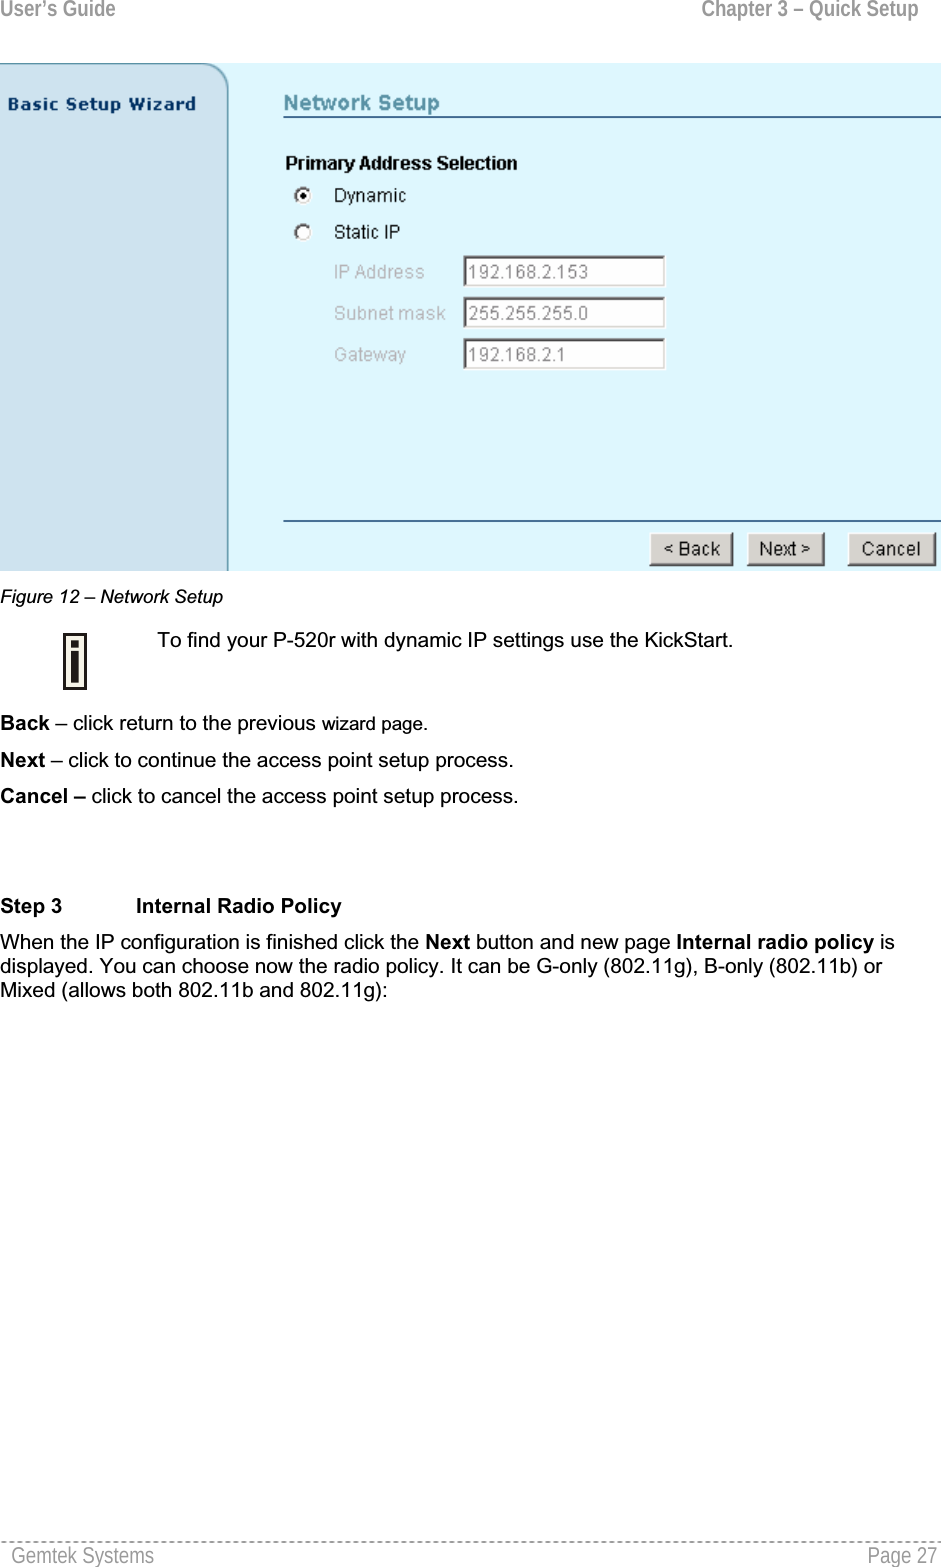 User’s Guide  Chapter 3 – Quick SetupFigure 12 – Network SetupTo find your P-520r with dynamic IP settings use the KickStart. Back – click return to the previous wizard page. Next – click to continue the access point setup process.Cancel – click to cancel the access point setup process.Step 3  Internal Radio PolicyWhen the IP configuration is finished click the Next button and new page Internal radio policy is displayed. You can choose now the radio policy. It can be G-only (802.11g), B-only (802.11b) orMixed (allows both 802.11b and 802.11g):Gemtek Systems  Page 27